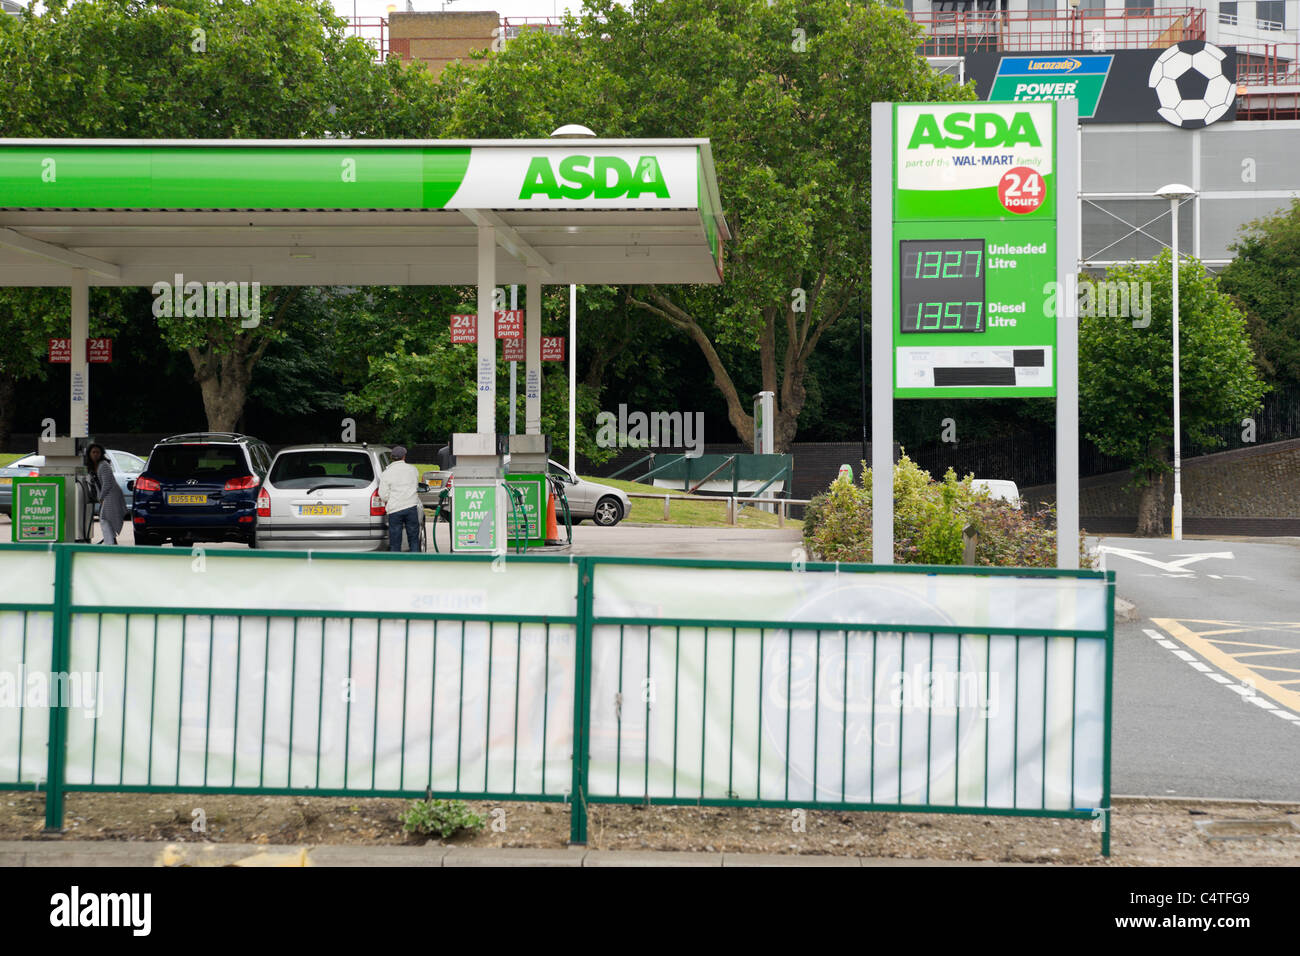 ASDA superstore petrol filling station near Crossharbour, Isle of Dogs, London, UK Stock Photo